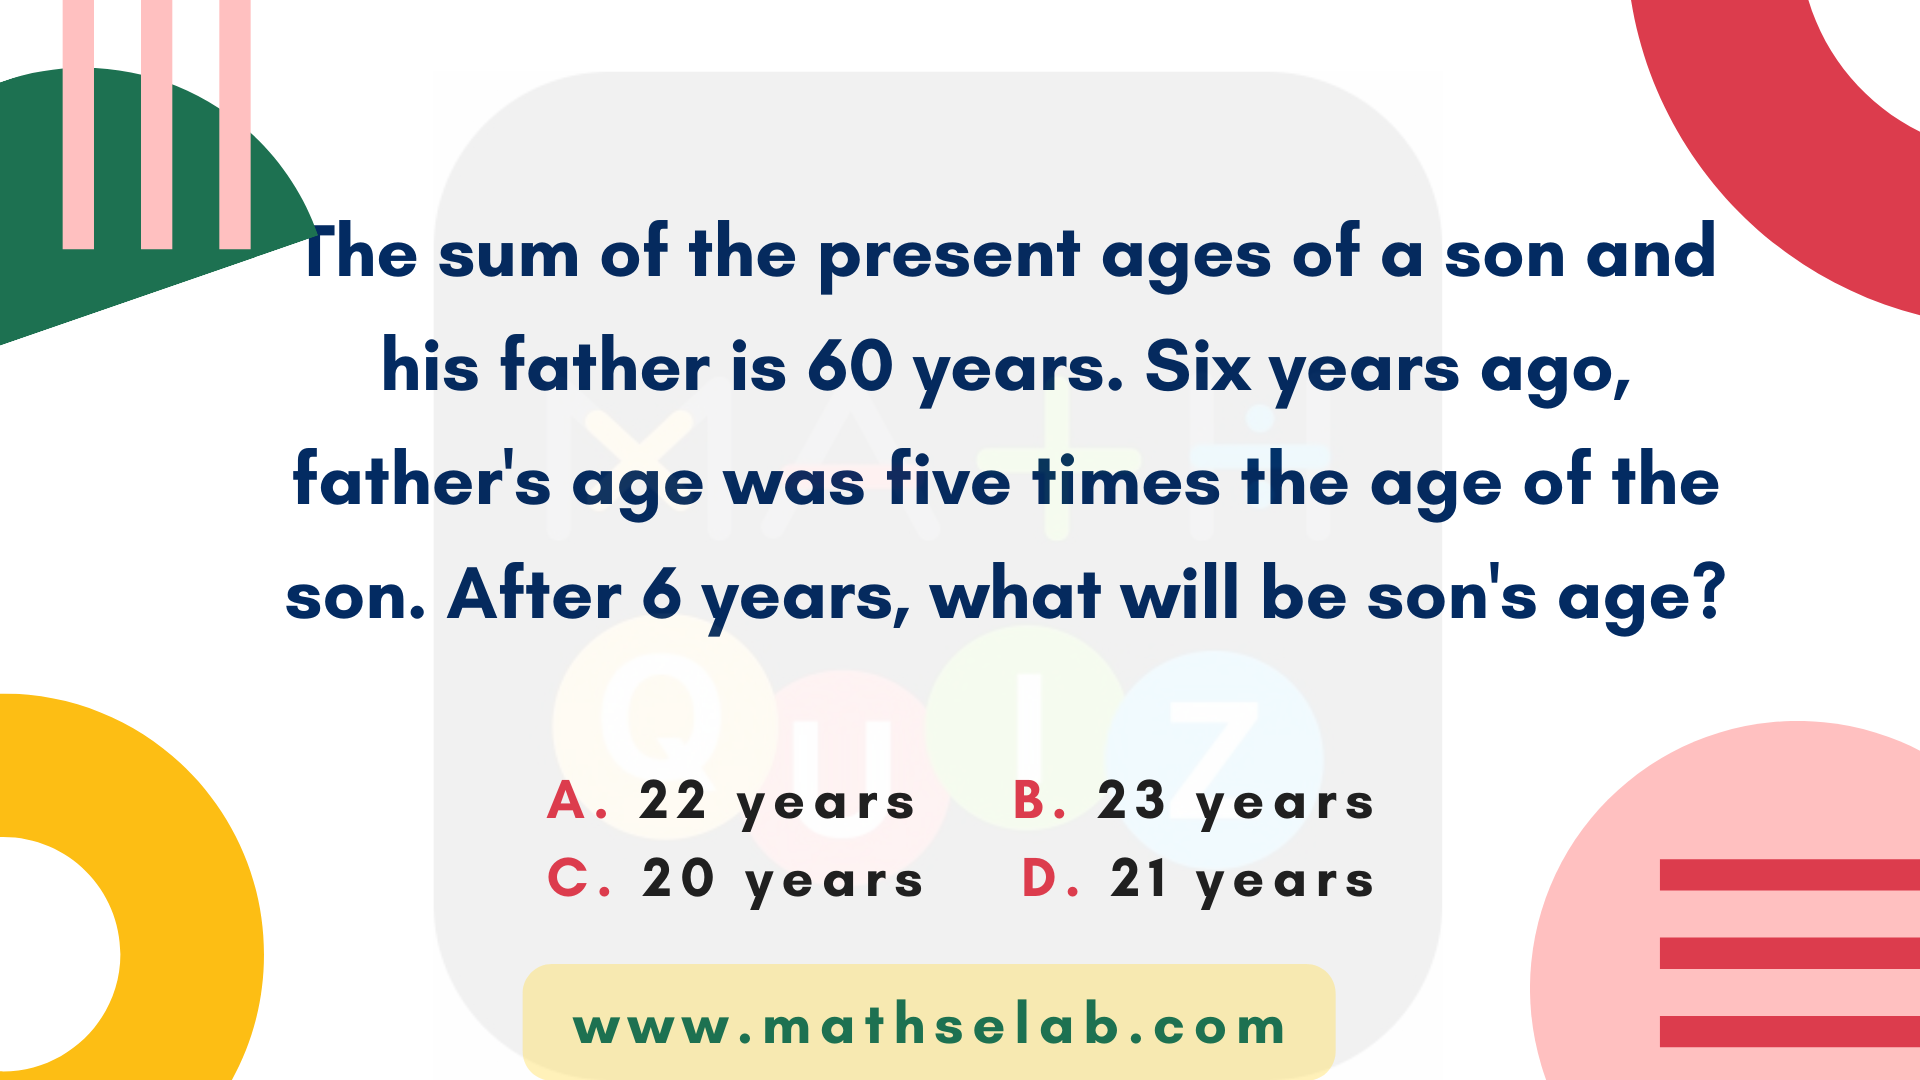 The sum of the present ages of a son and his father is 60 years. Six years ago, father's age was five times the age of the son. After 6 years, what will be son's age - www.mathselab.com